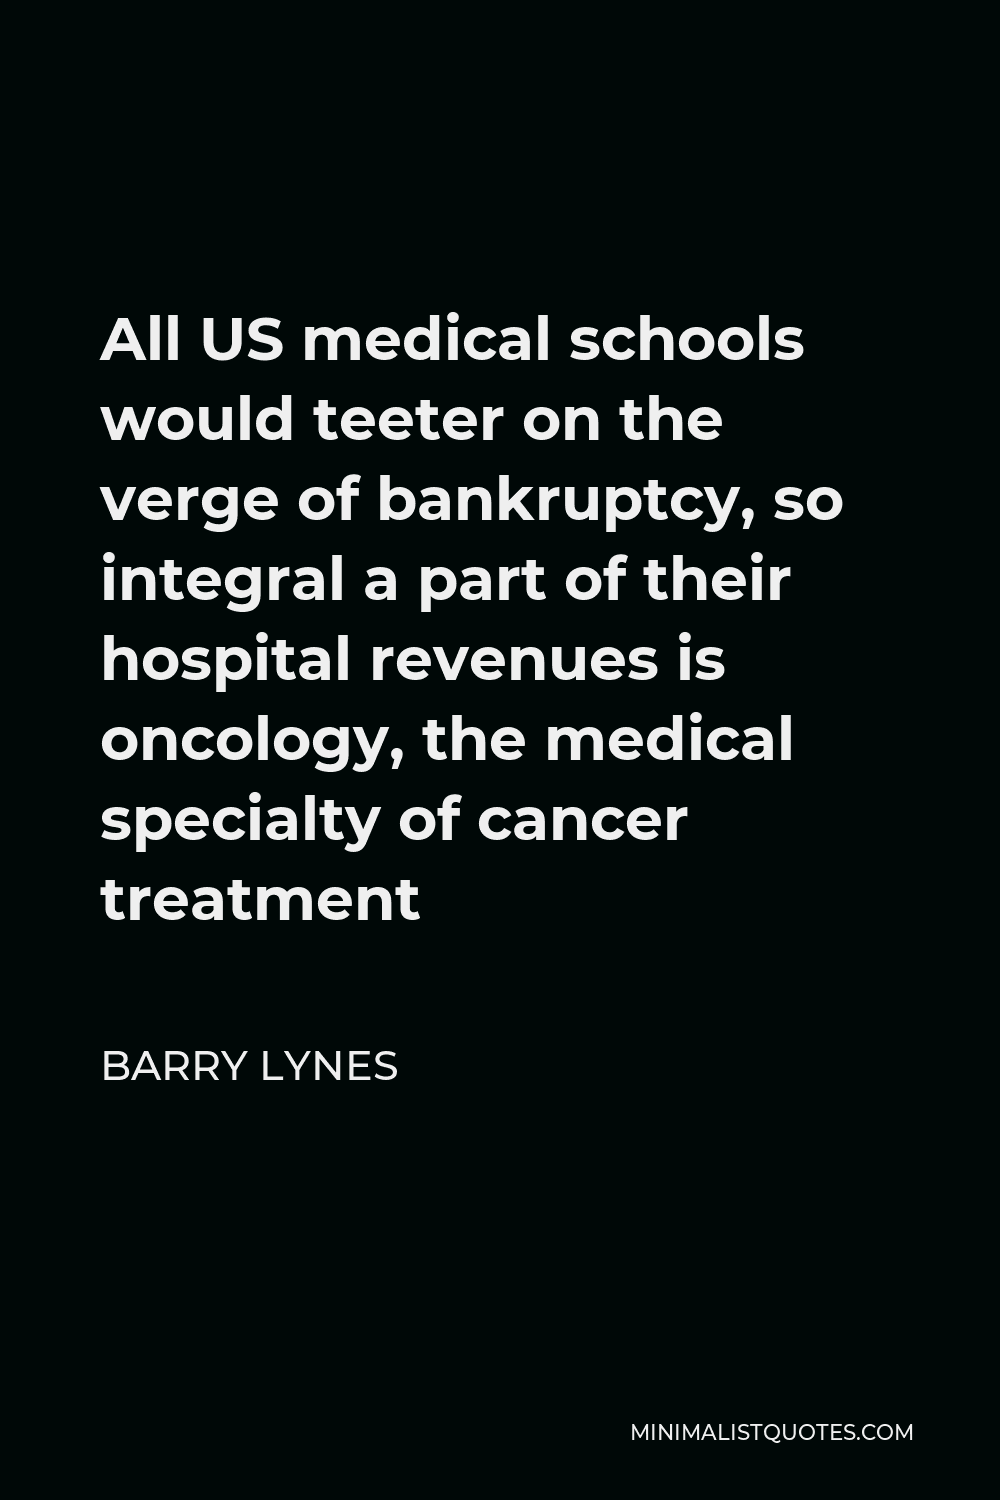 Barry Lynes Quote - All US medical schools would teeter on the verge of bankruptcy, so integral a part of their hospital revenues is oncology, the medical specialty of cancer treatment